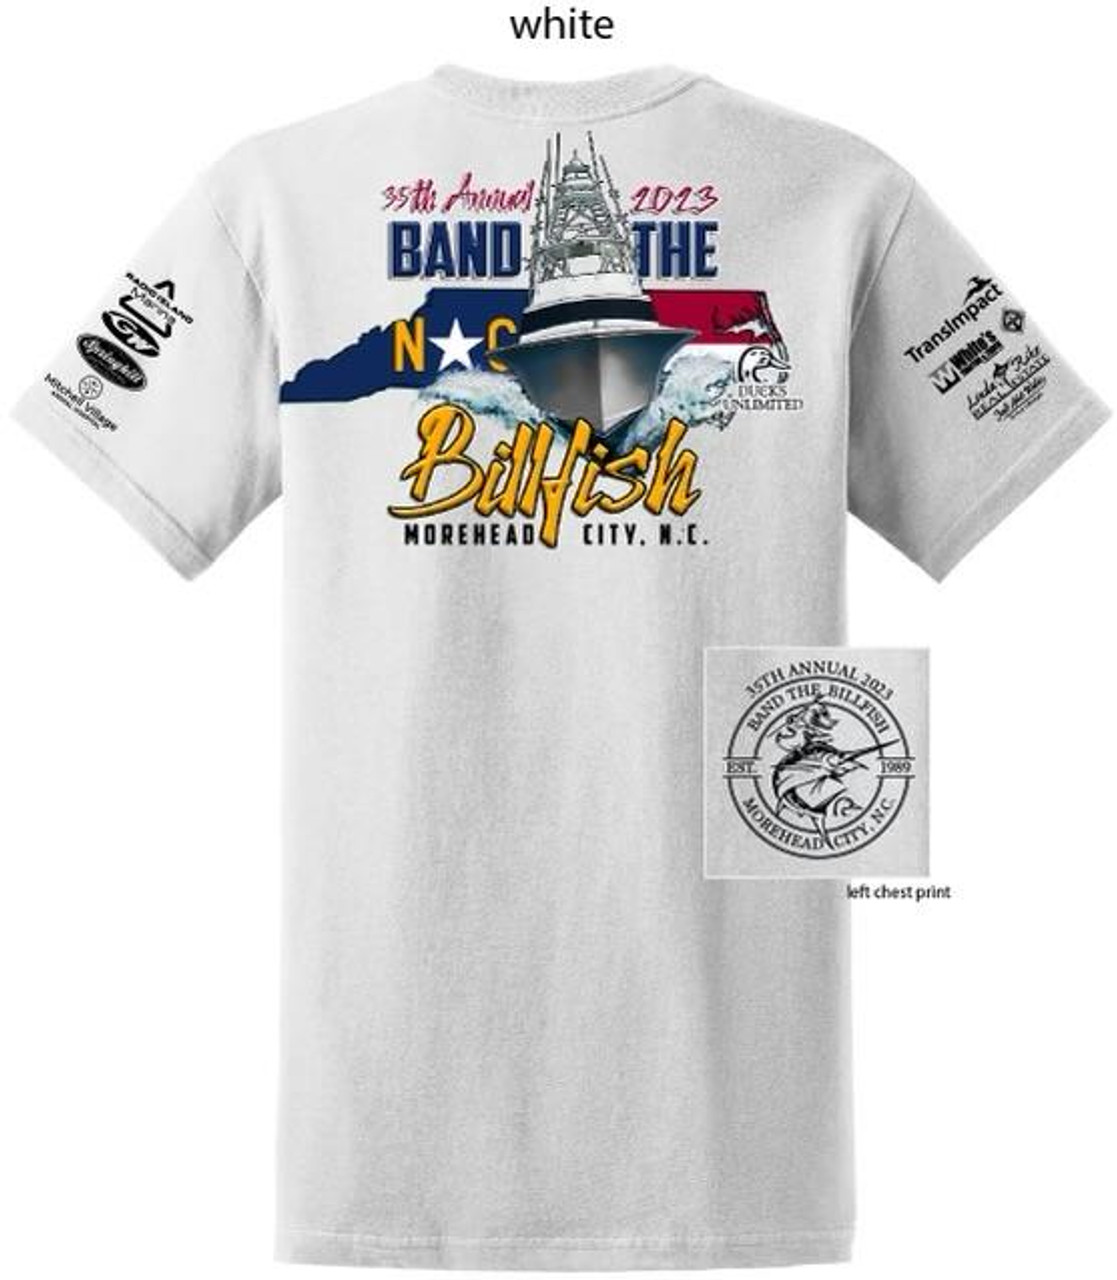 https://cdn11.bigcommerce.com/s-zm4ewfchee/images/stencil/1280x1280/products/8744/36076/35th-Ducks-Unlimited-Band-The-Billfish-T-shirt-400100002207_image2__89305.1702002594.jpg?c=1